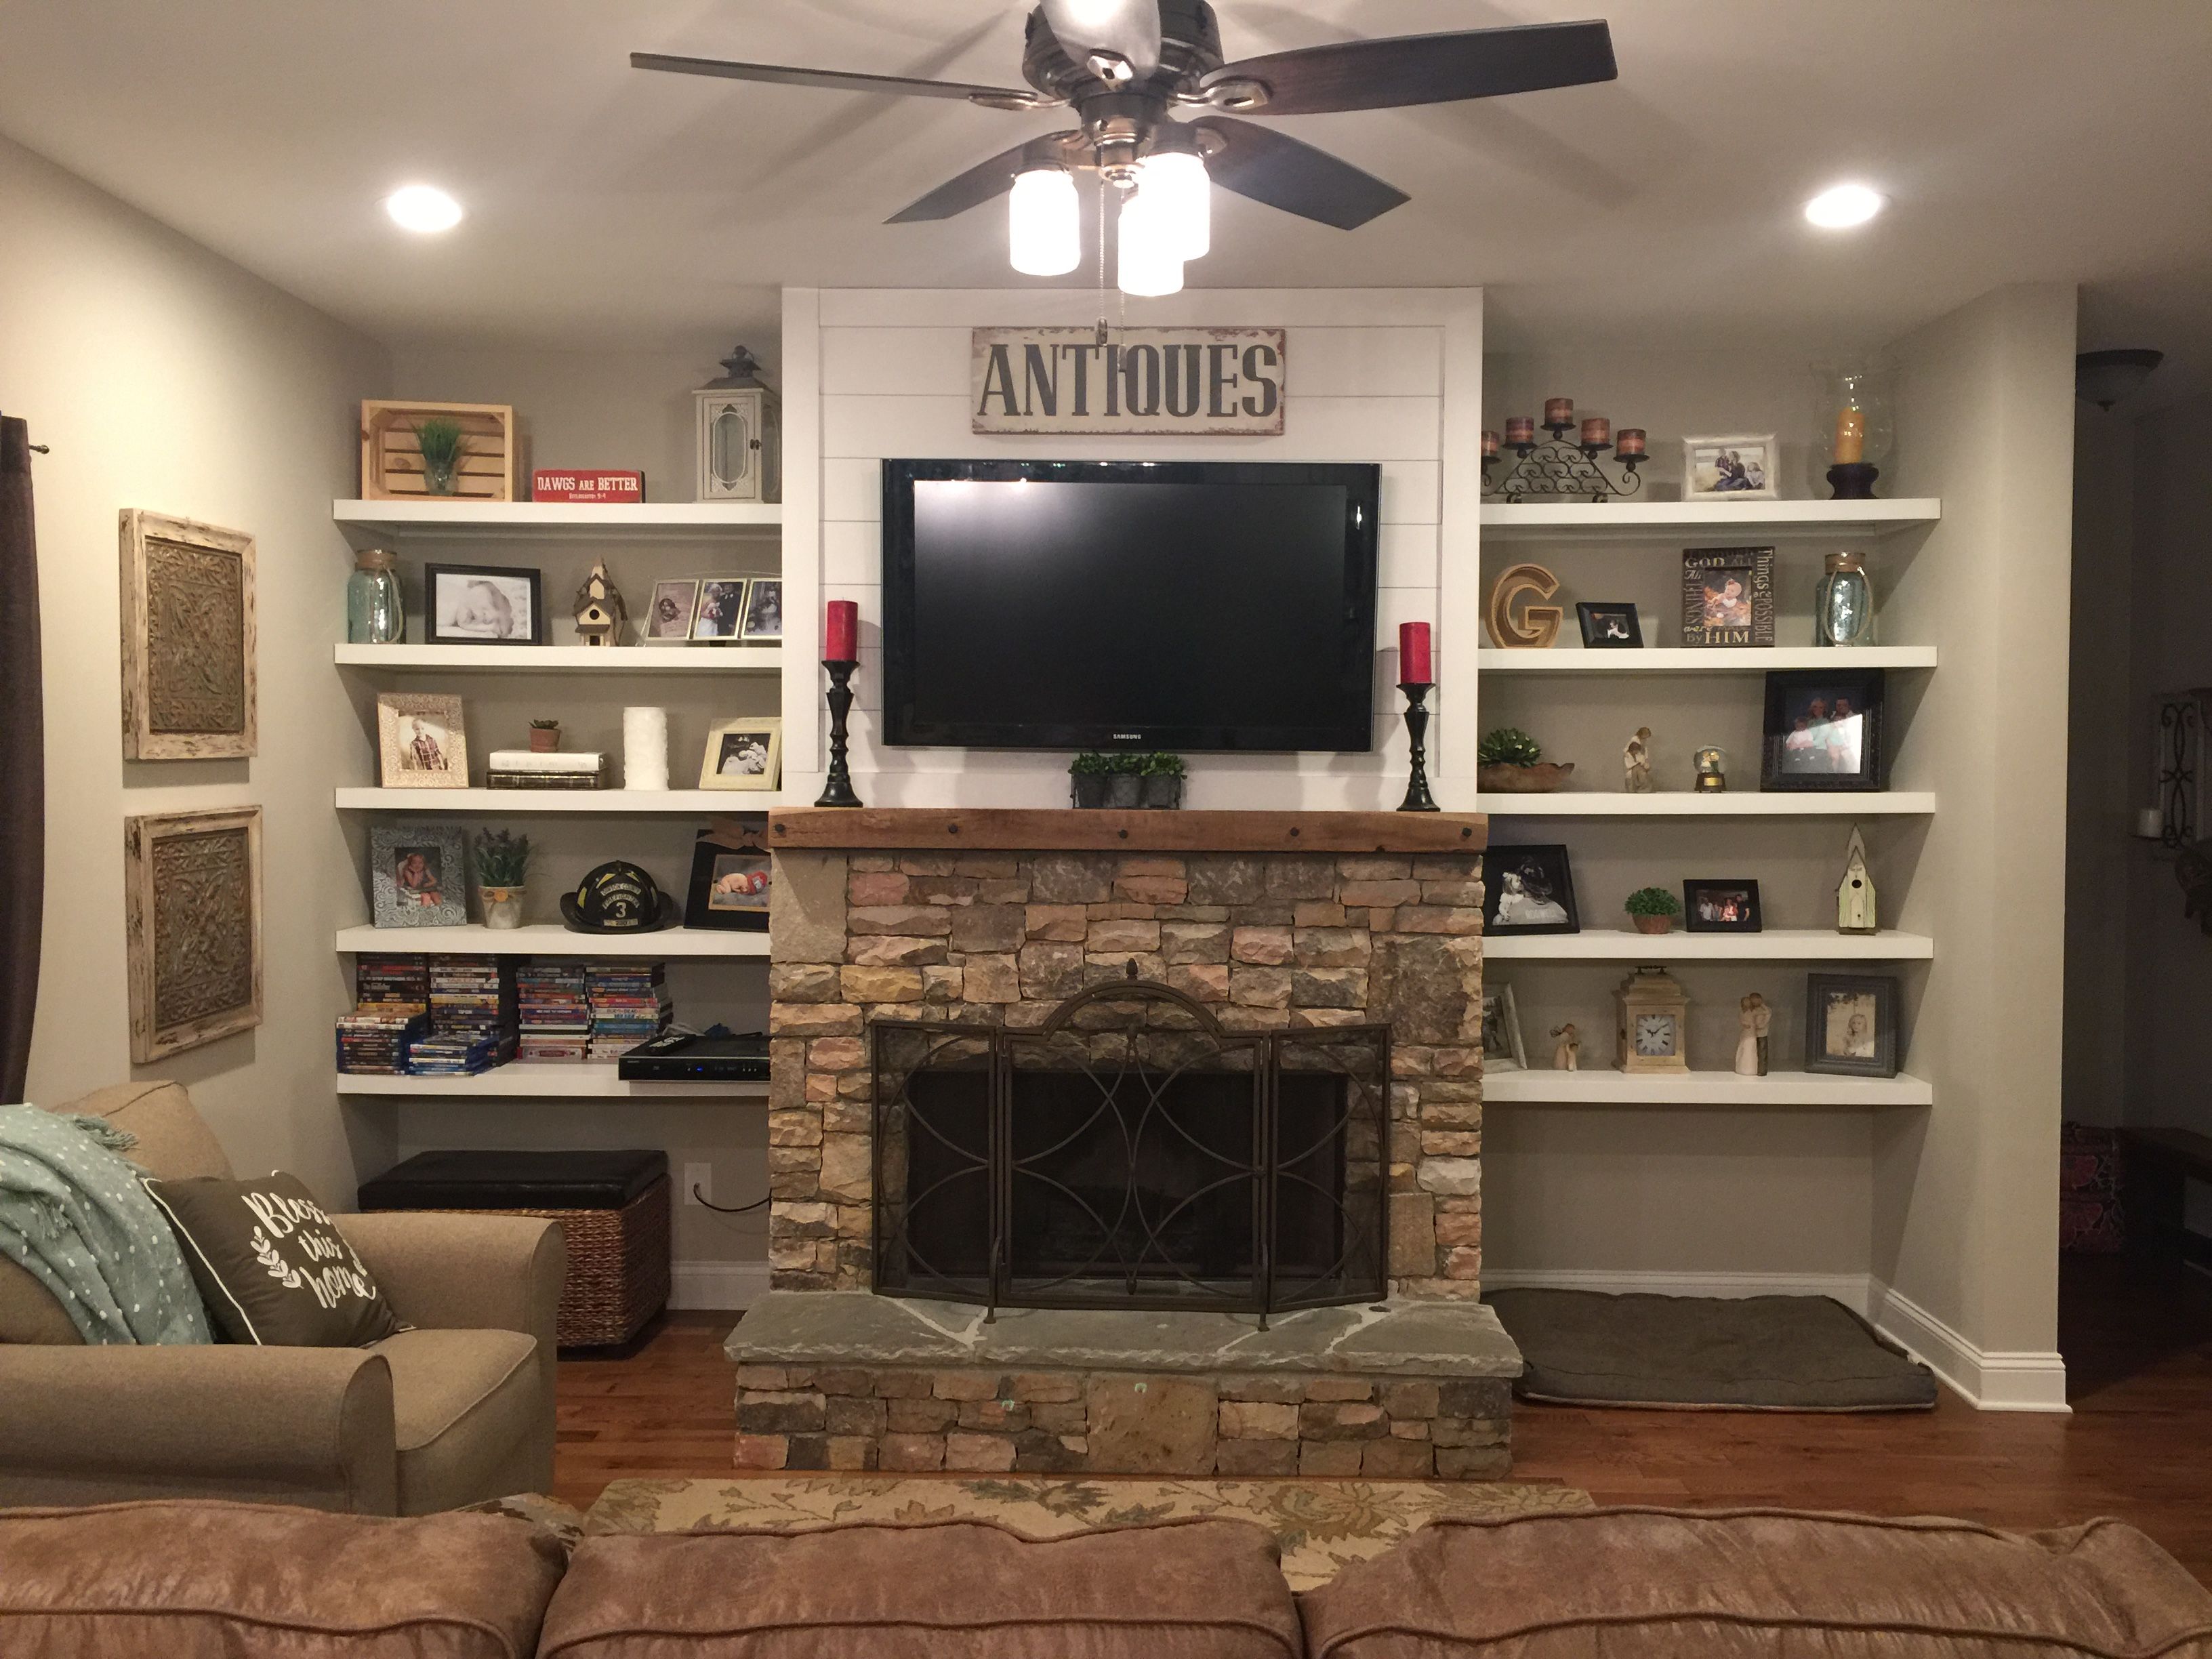 How to Make An Electric Fireplace Look Built In Best Of Stacked Rock Fireplace Barnwood Mantel Shiplap top with